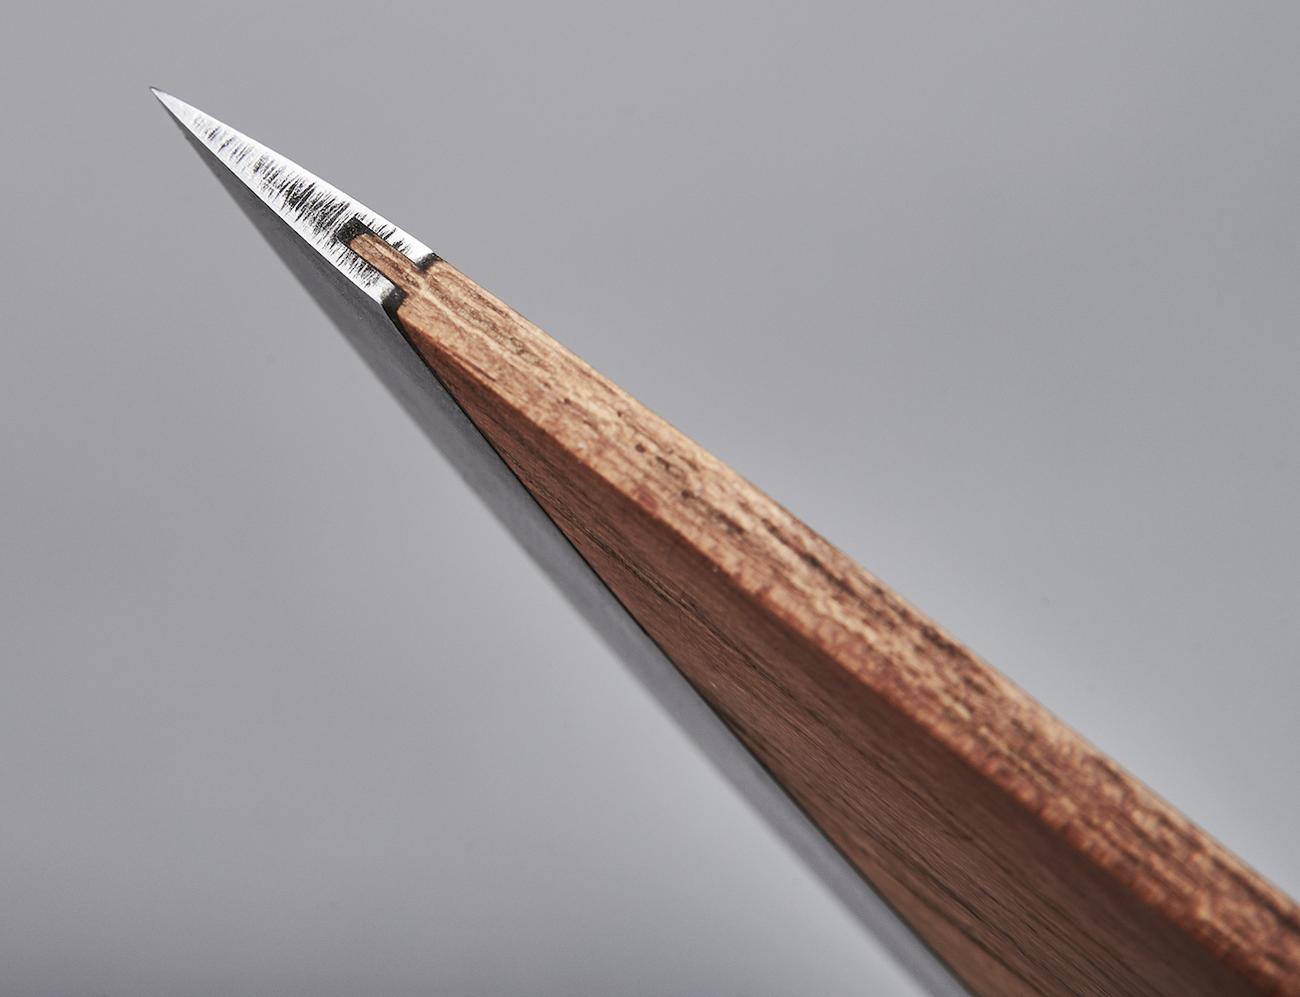 SKID Wooden Chef Knife: Form Beyond Function.